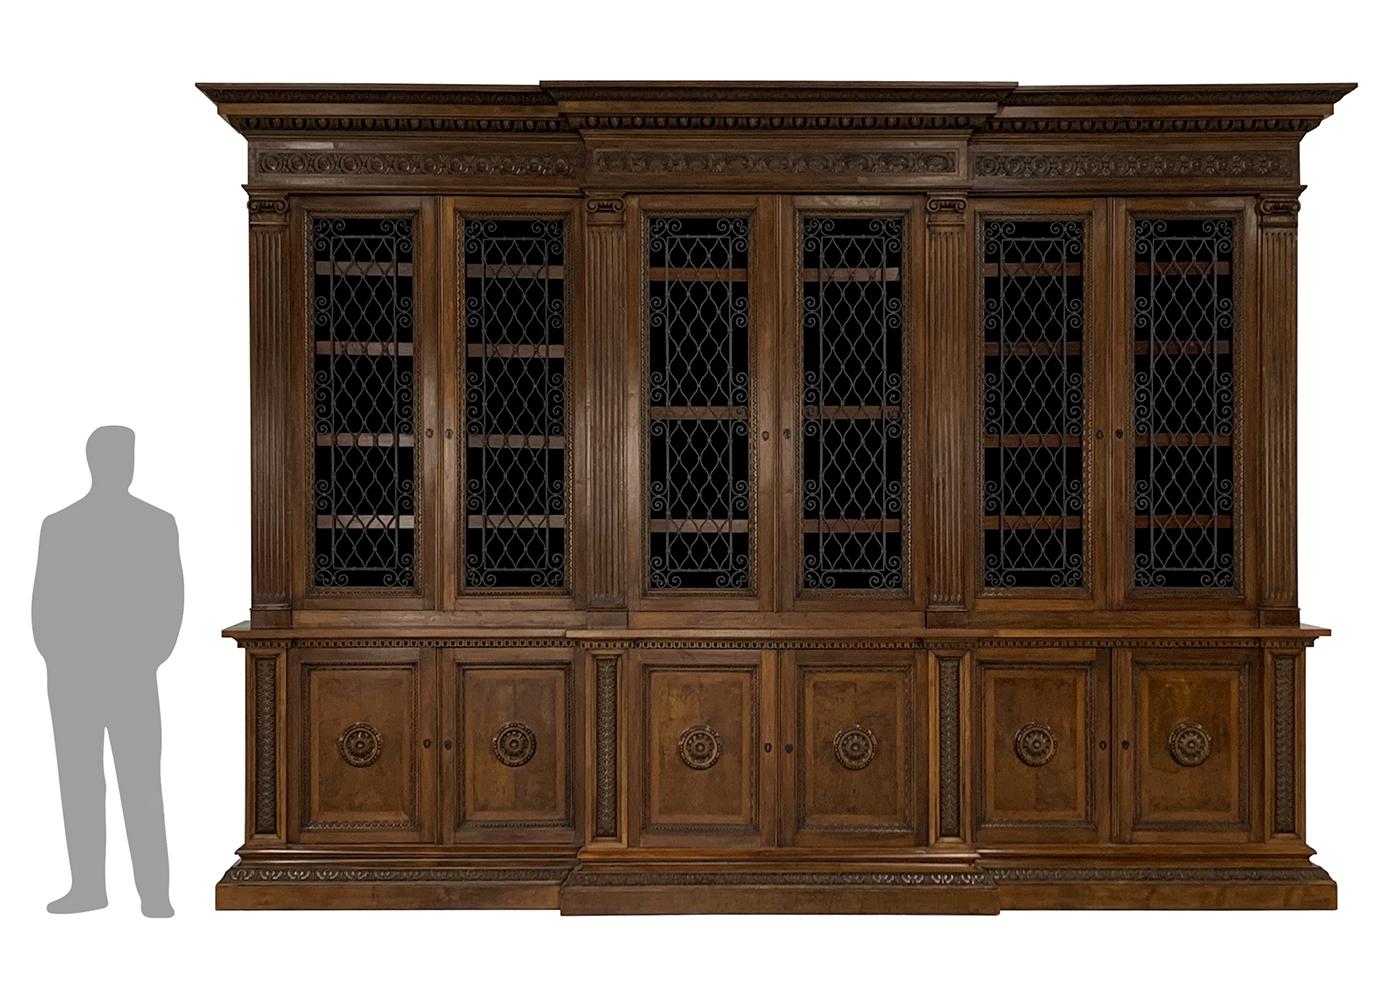 Each designed with a base containing four double closed doors with crisply carved circular medallions in the center. The top containing four double doors designed with exquisite hand forged iron grill panels below a heavy crown mould of shells,